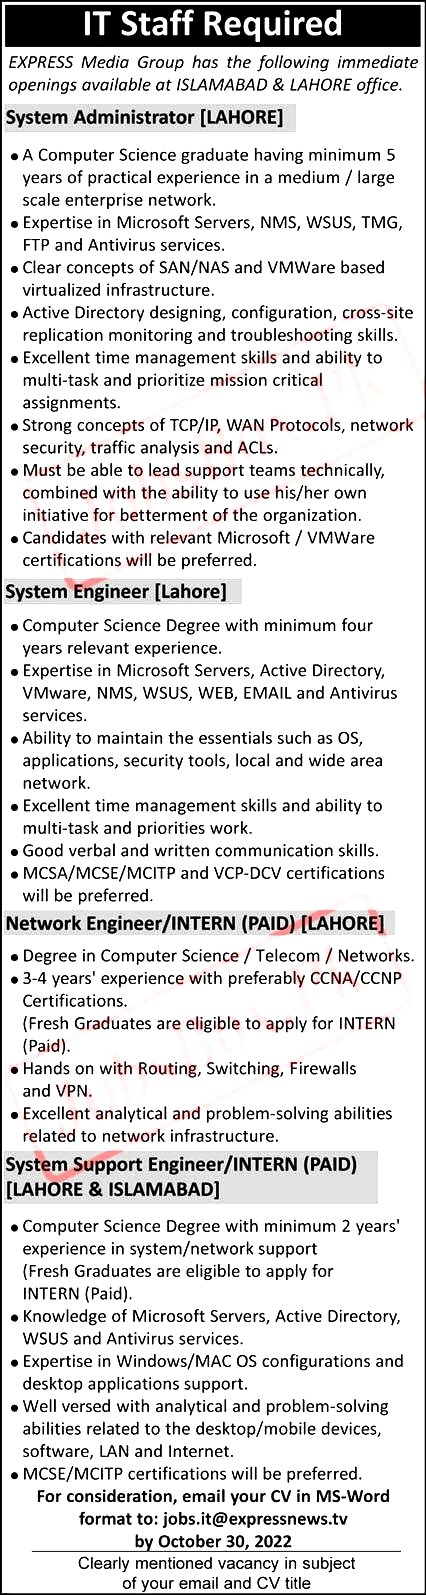 Express Media Group Islamabad and Lahore Offices Jobs 2022